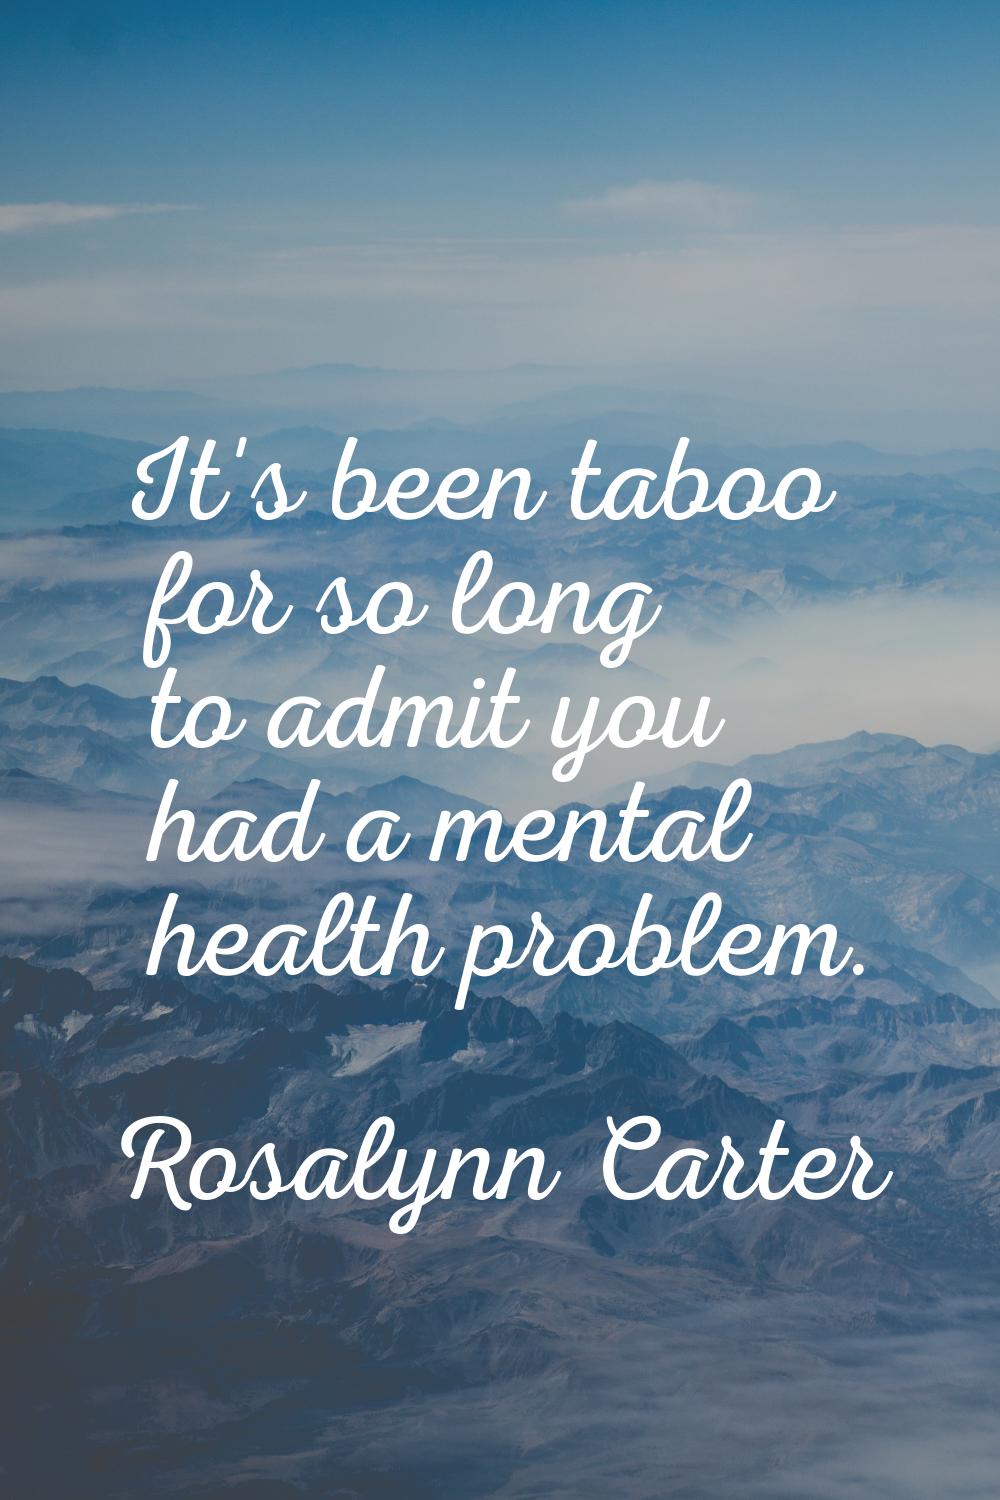 It's been taboo for so long to admit you had a mental health problem.